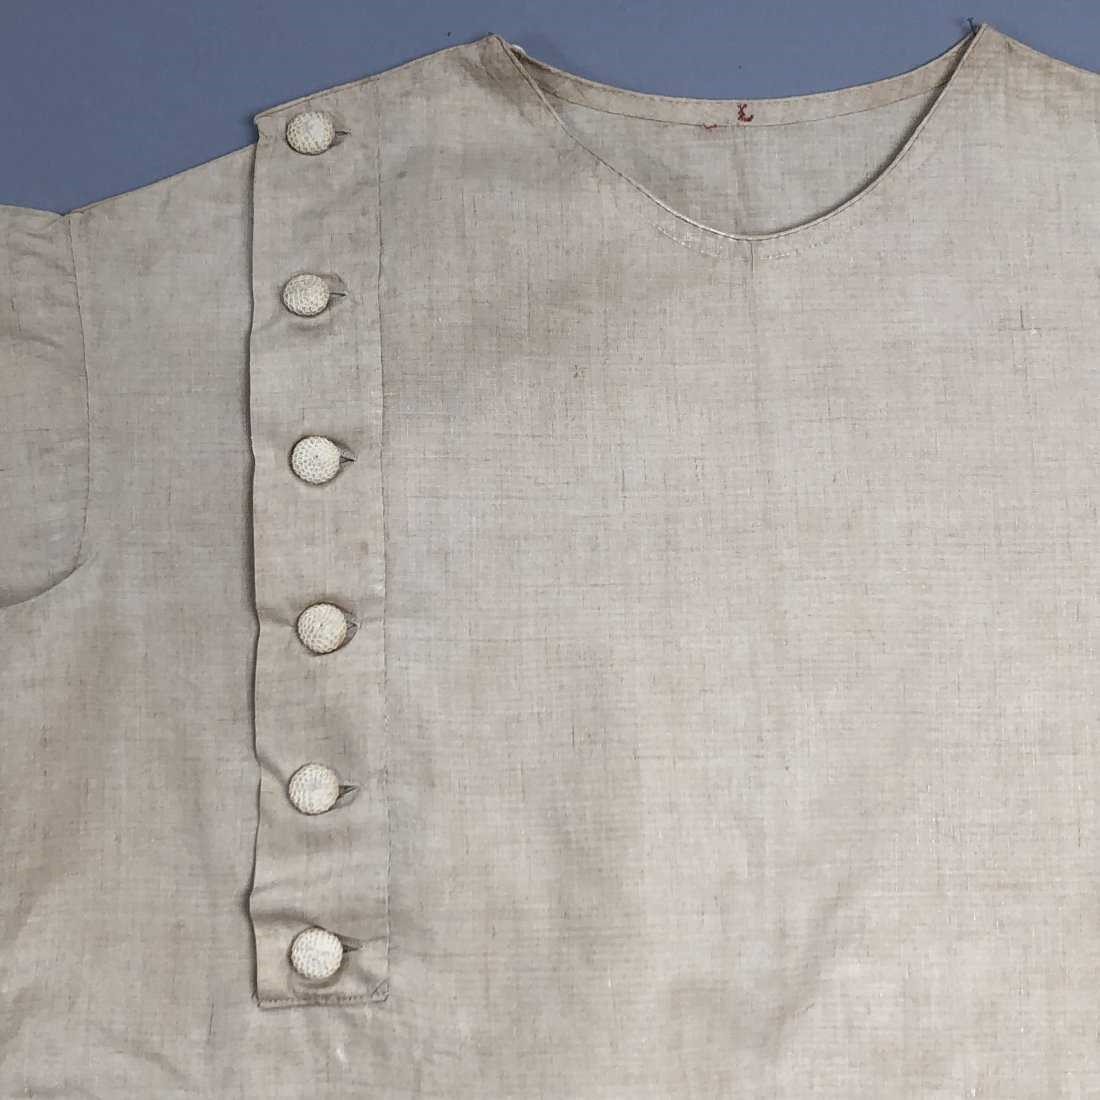 Who wore it? Researching Queen Victoria's children’s clothes - HRP Blogs